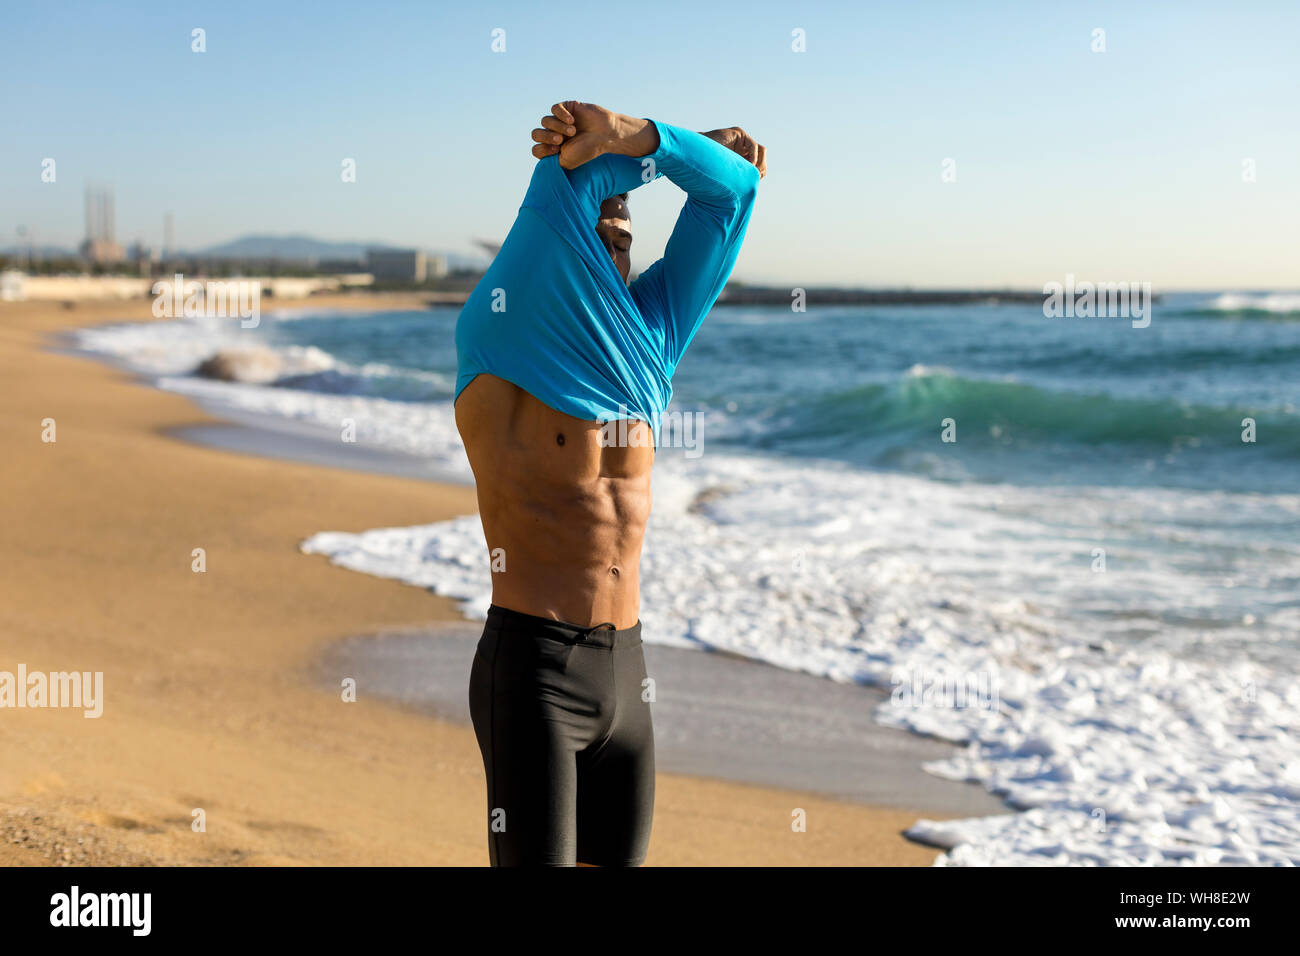 Man taking off his shirt during a workout on the beach Stock Photo